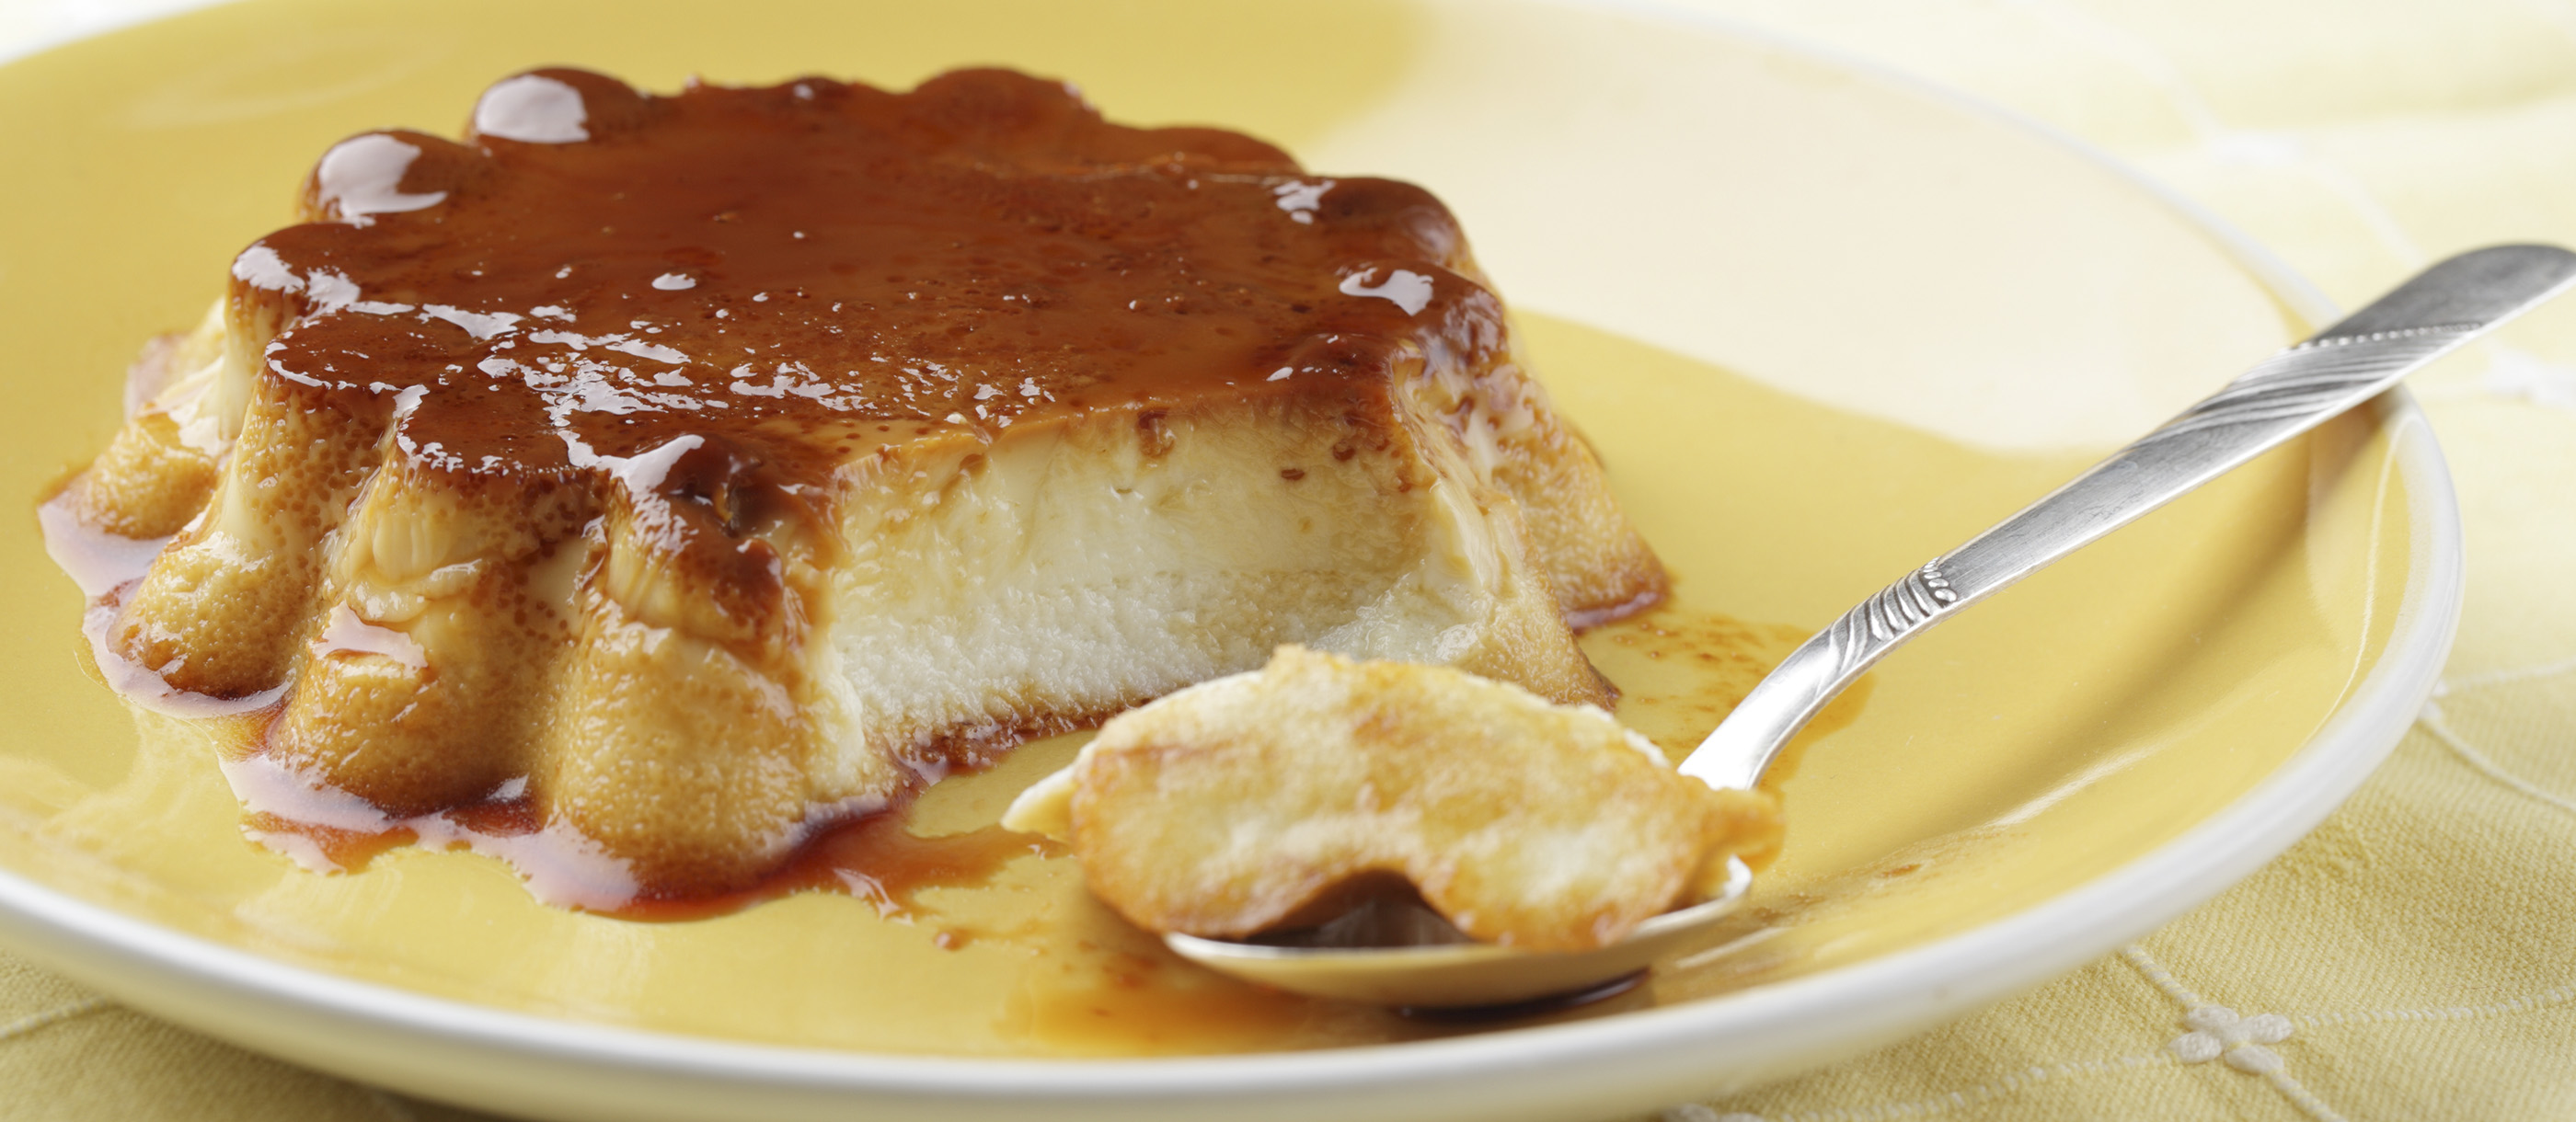 Flan de Coco | Traditional Dessert From Colombia